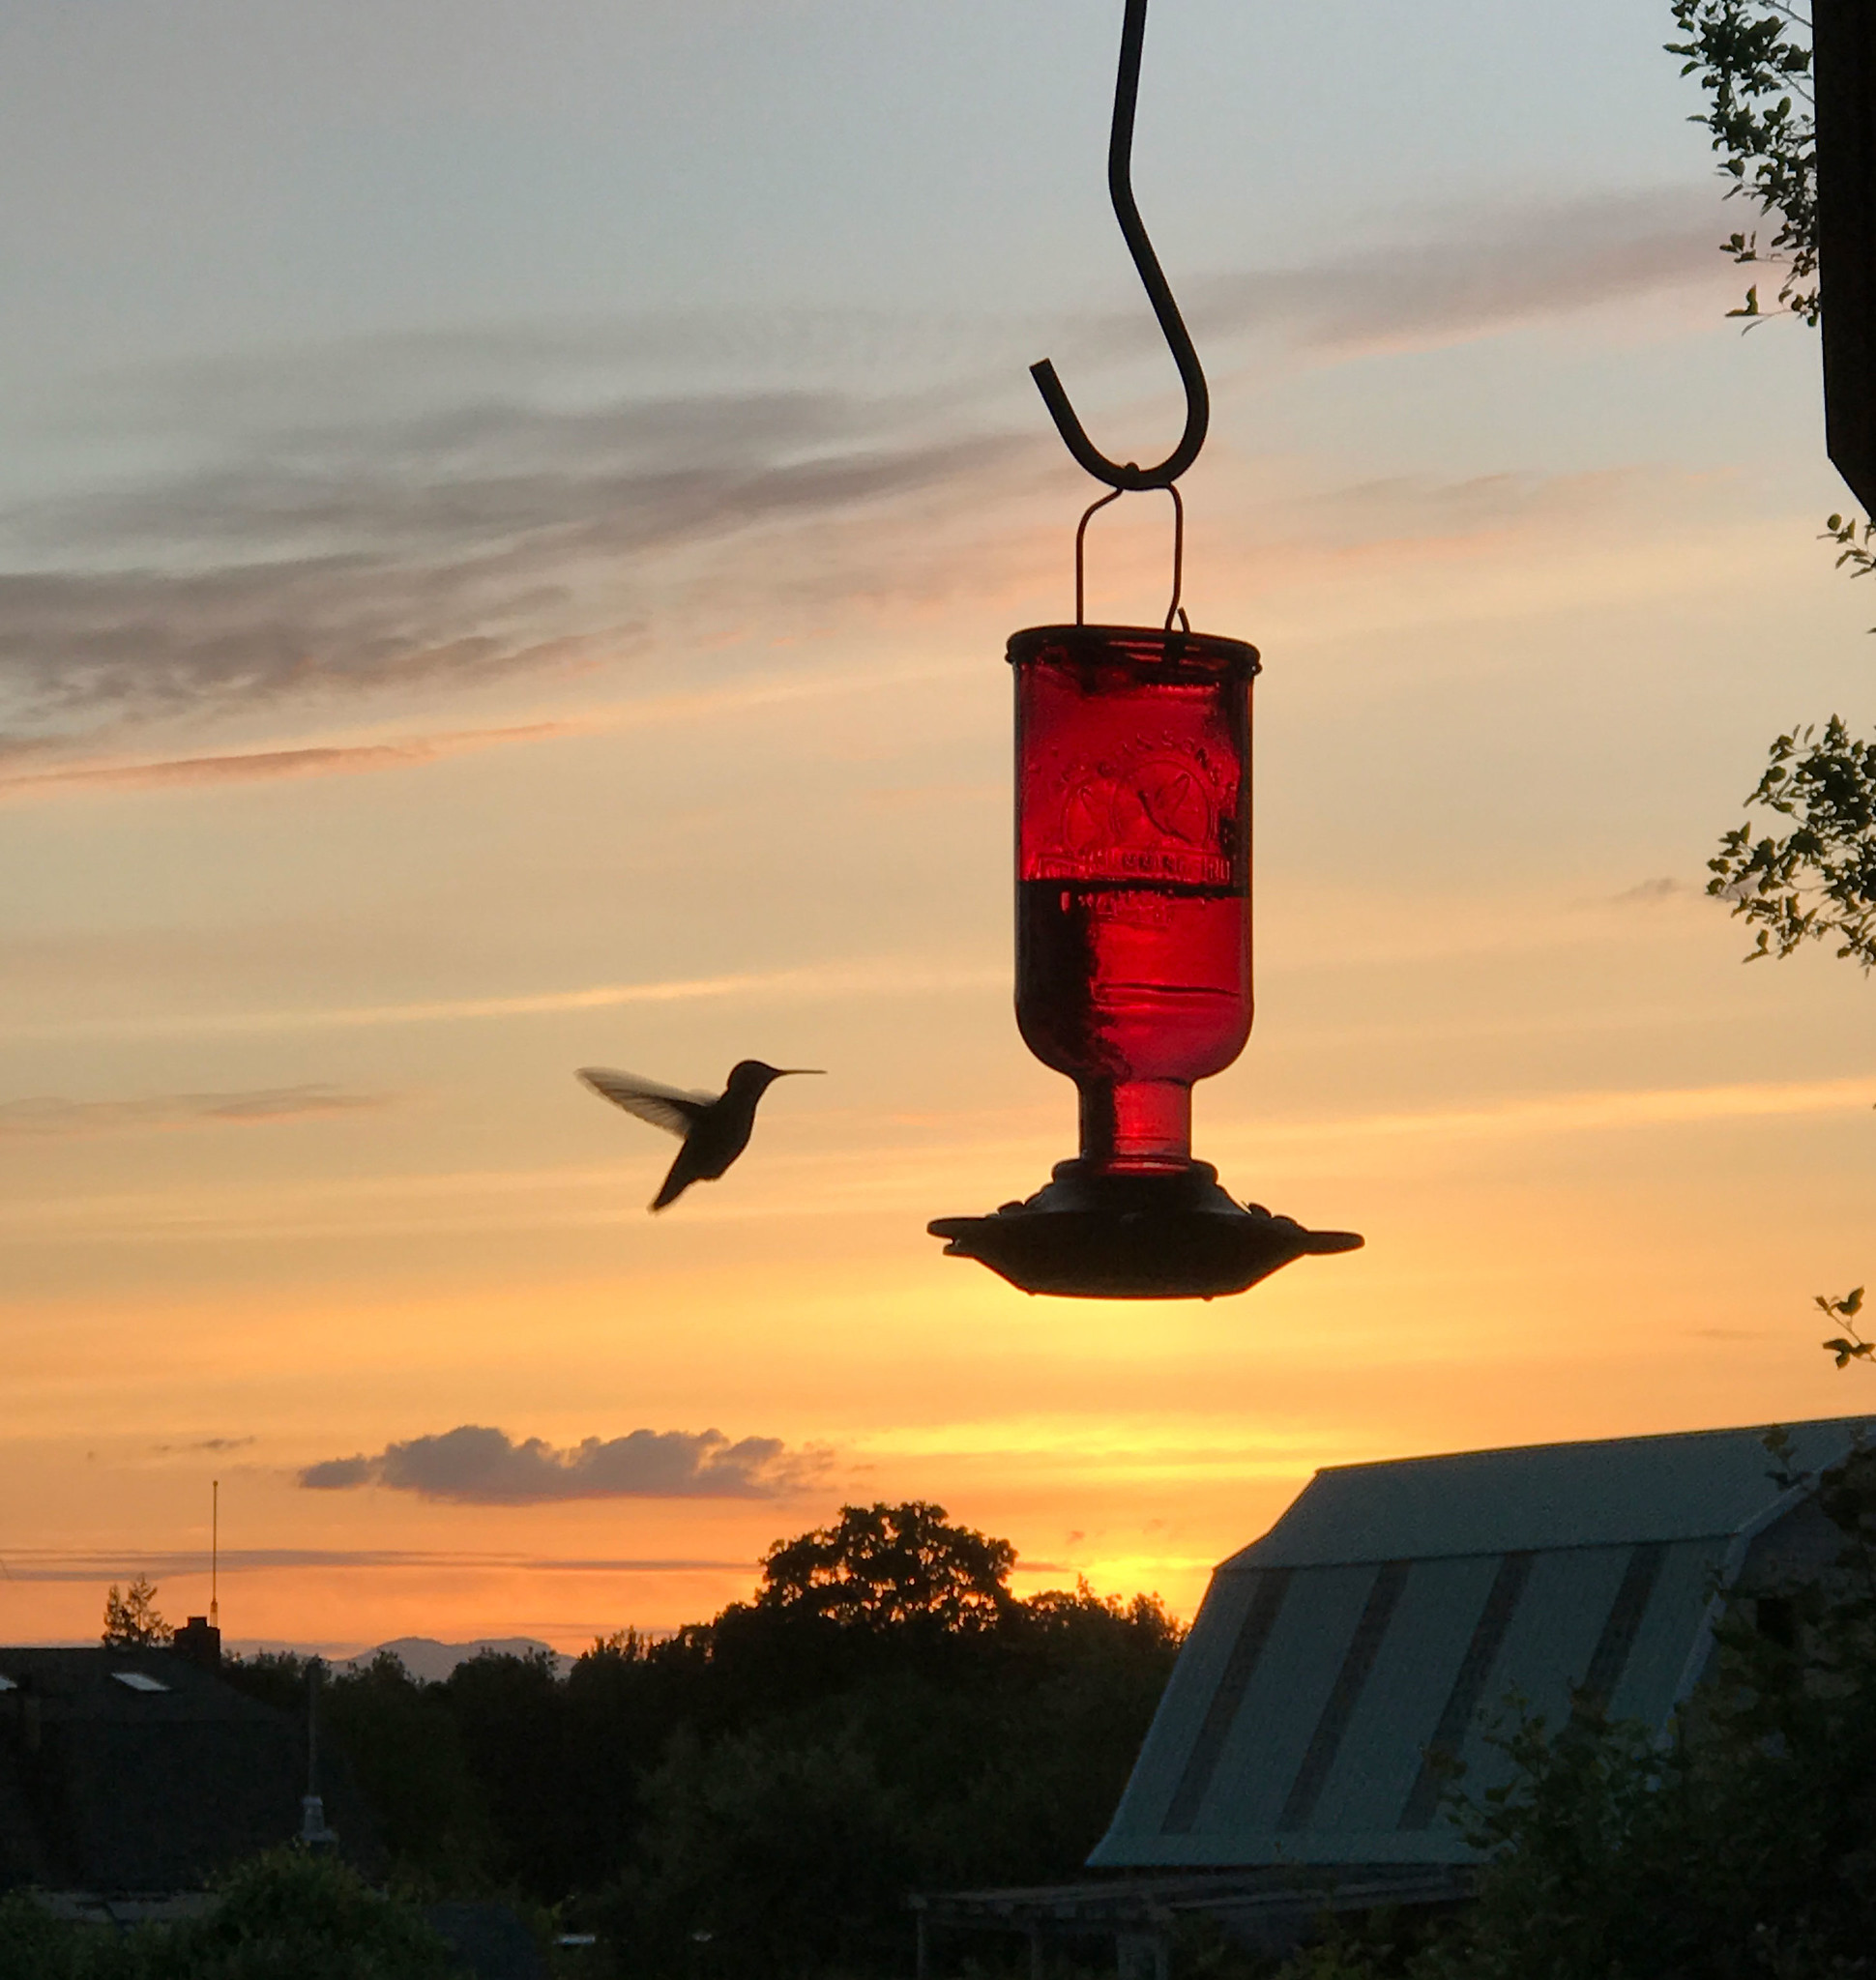 Offer nectar to tempt hummingbirds to the garden